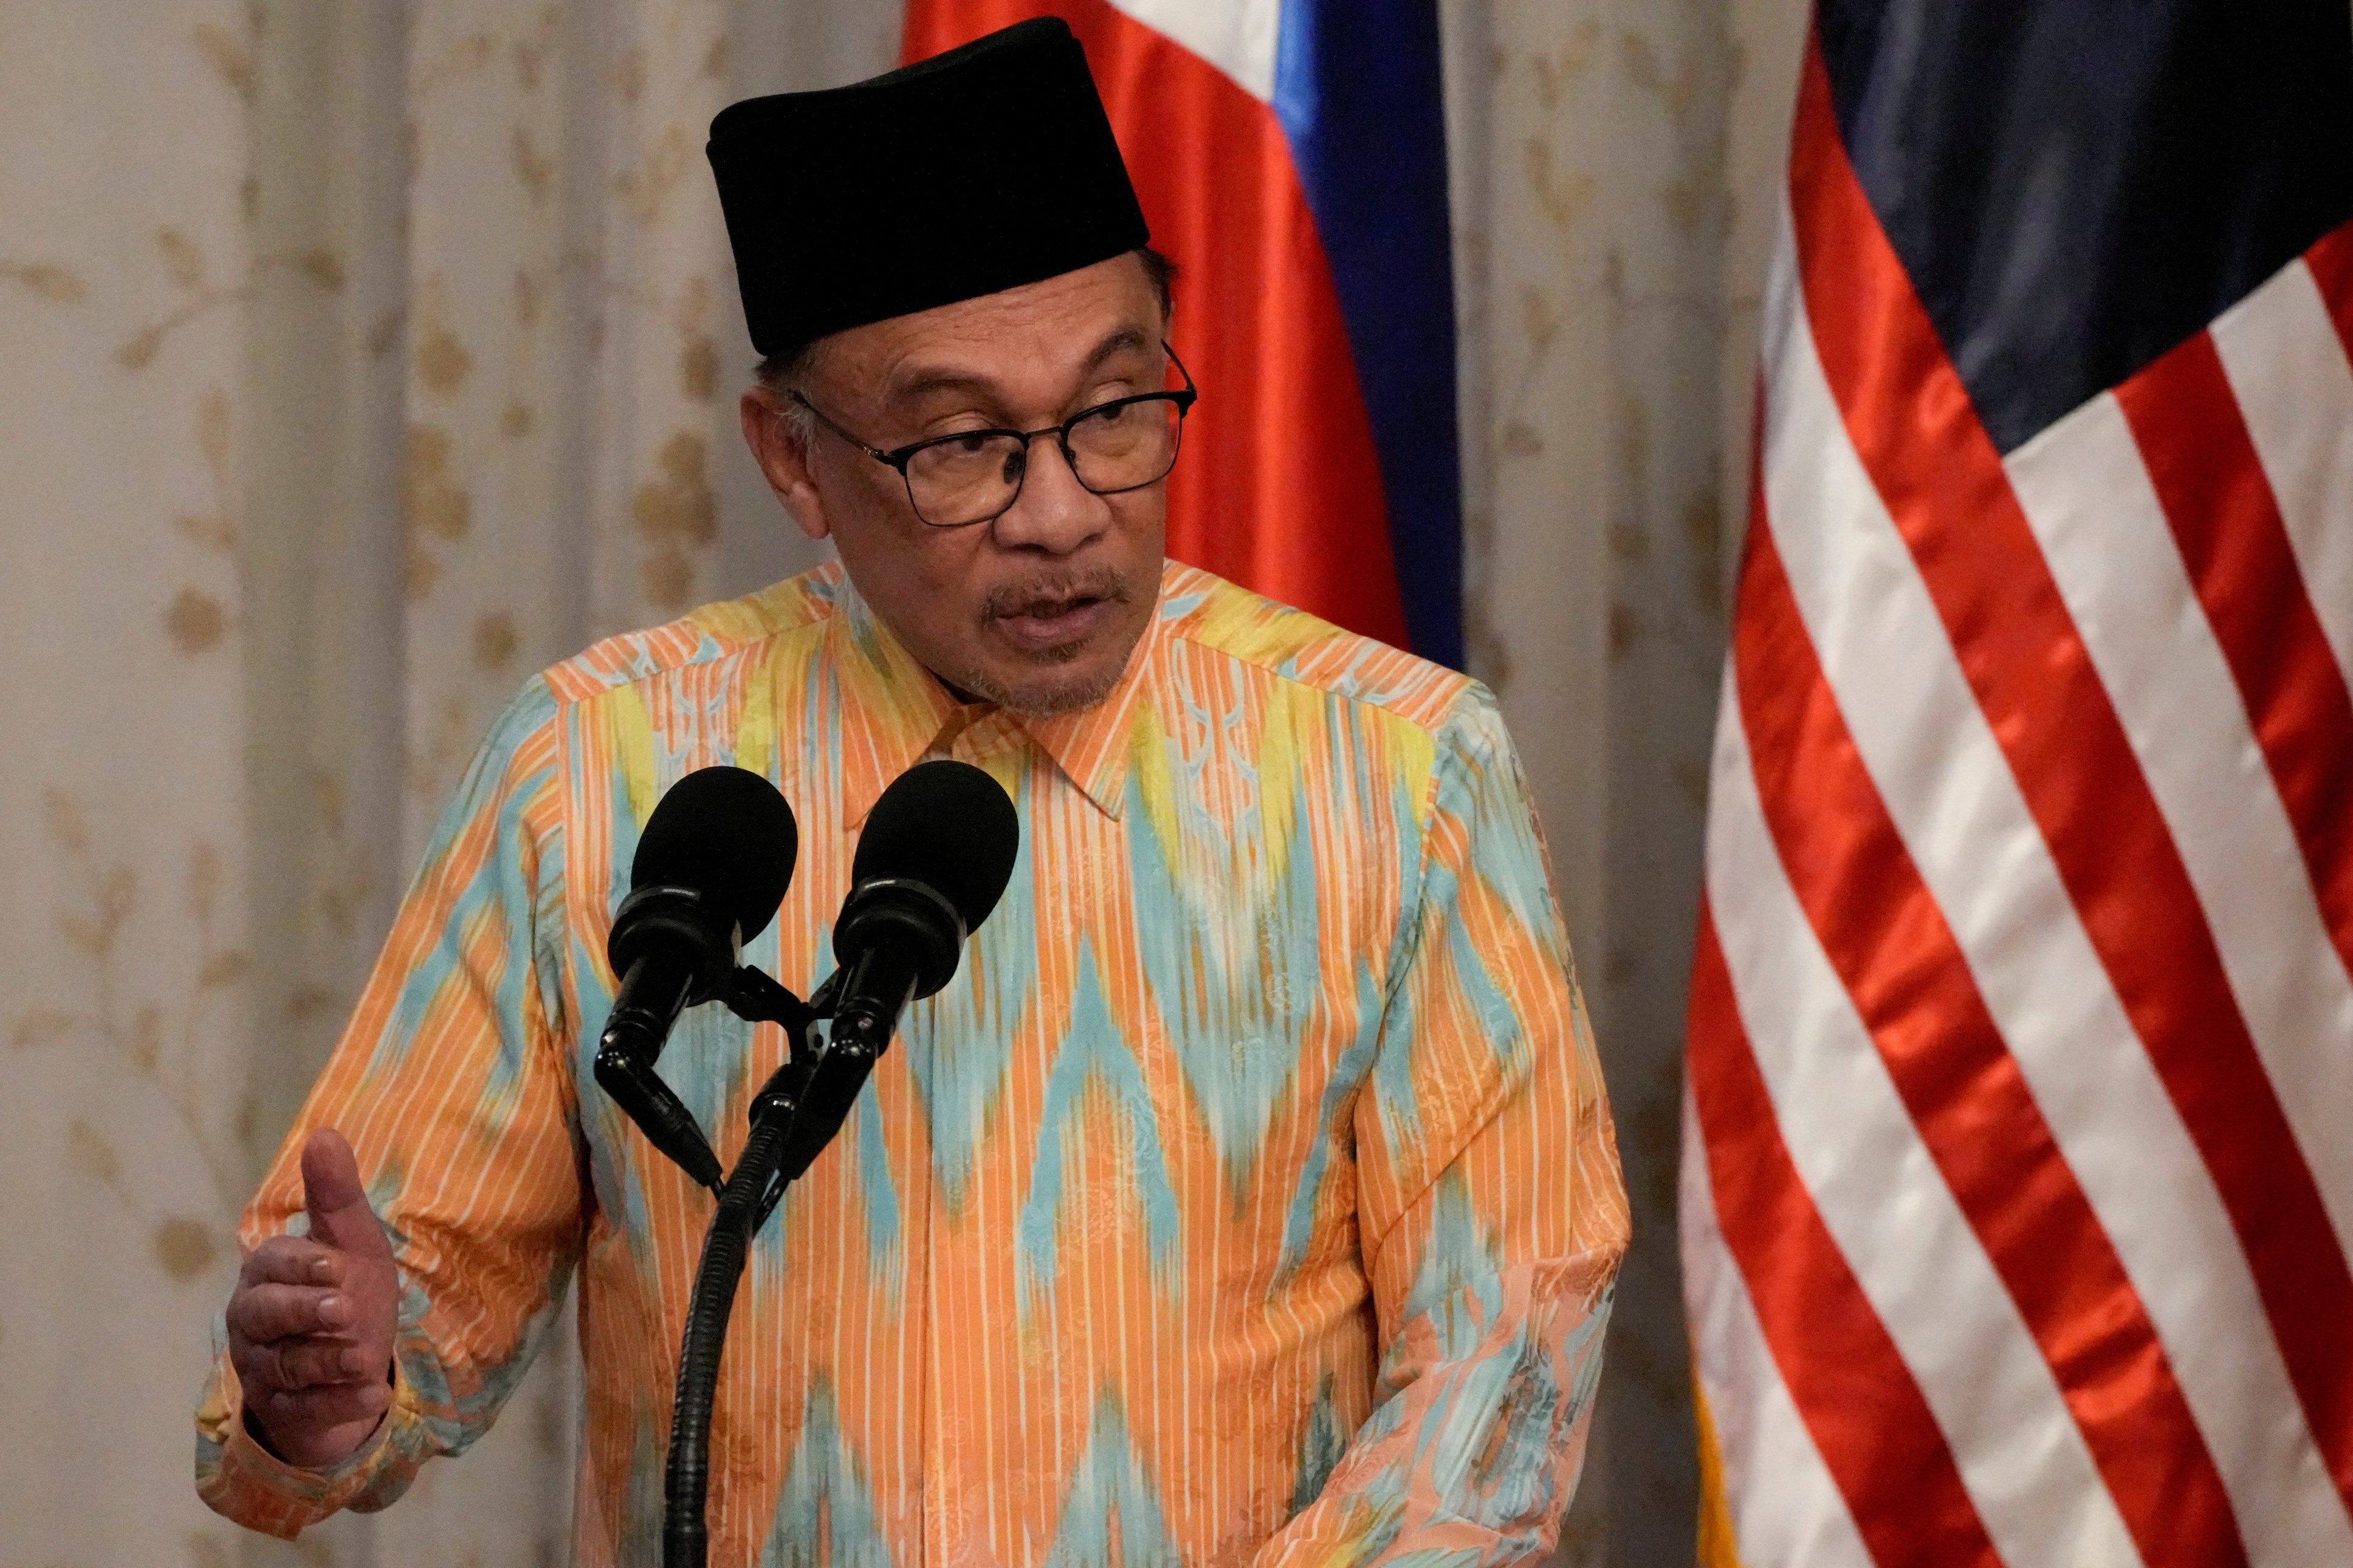 Less than a year after taking office, Malaysian Prime Minister Anwar Ibrahim faces a critical first test in state elections next month that pits his government against a powerful Islamic opposition. Photo: Pool via Reuters